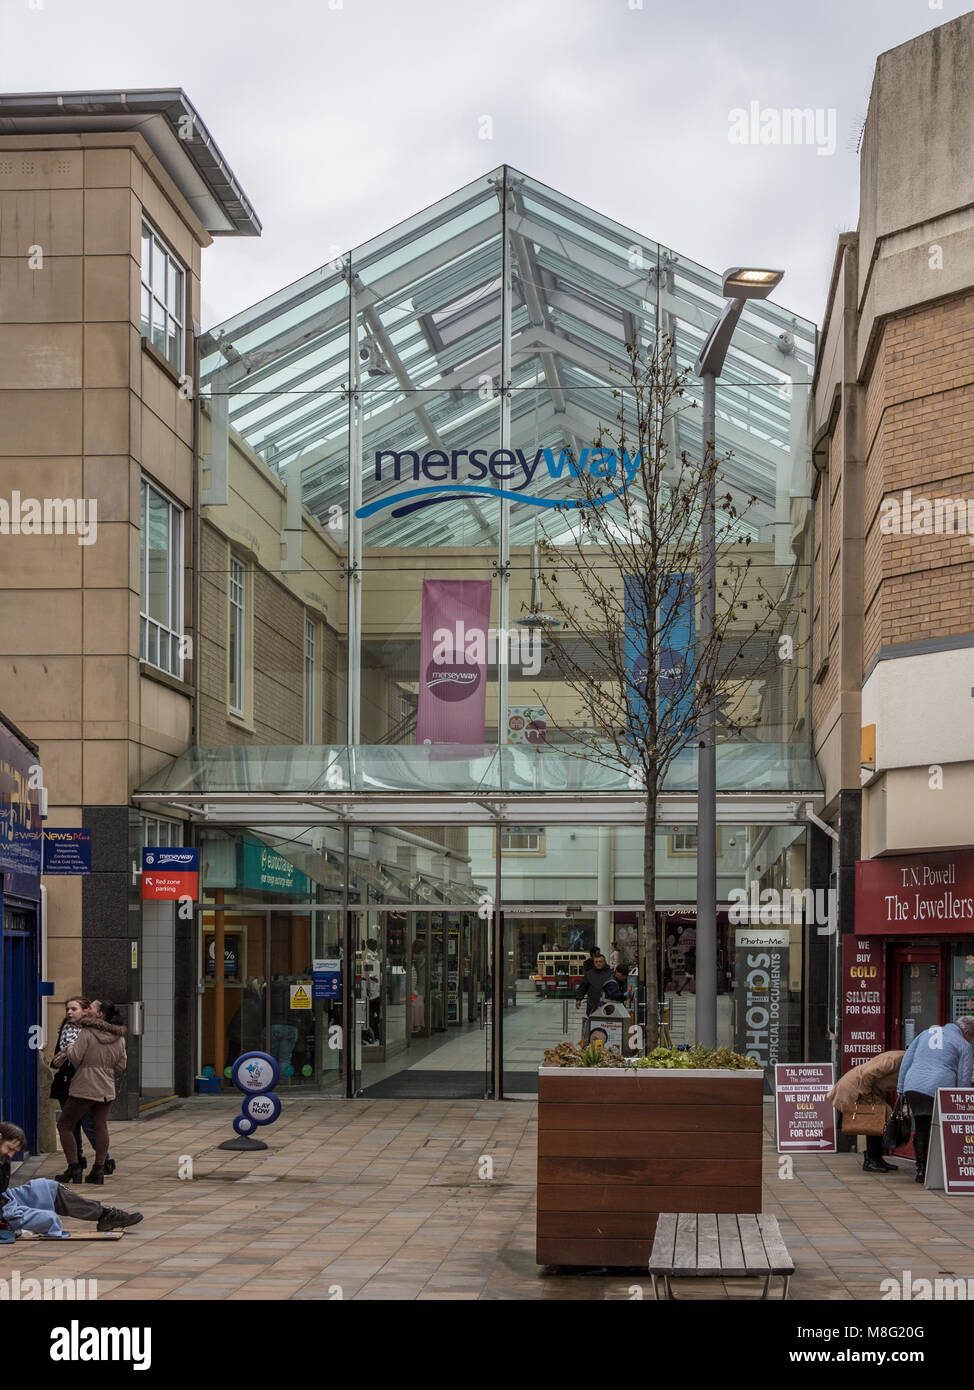 Stockport Town Centre Merseyway Shopping area, Stock Photo